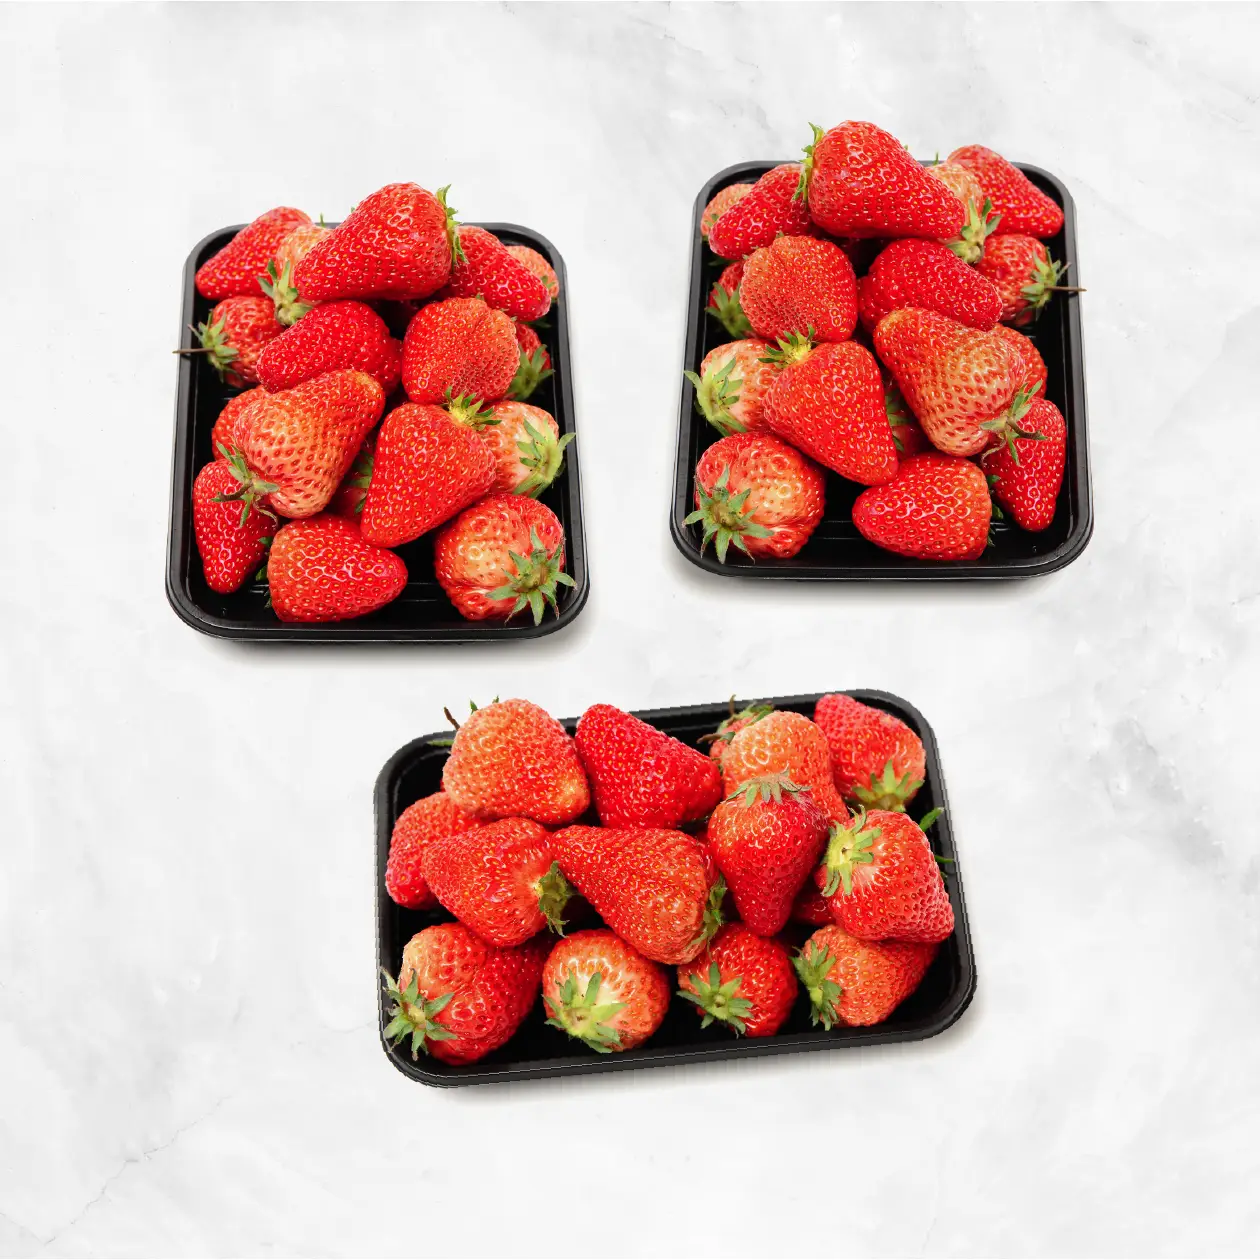 Organic Strawberries - 3 Pint Delivery